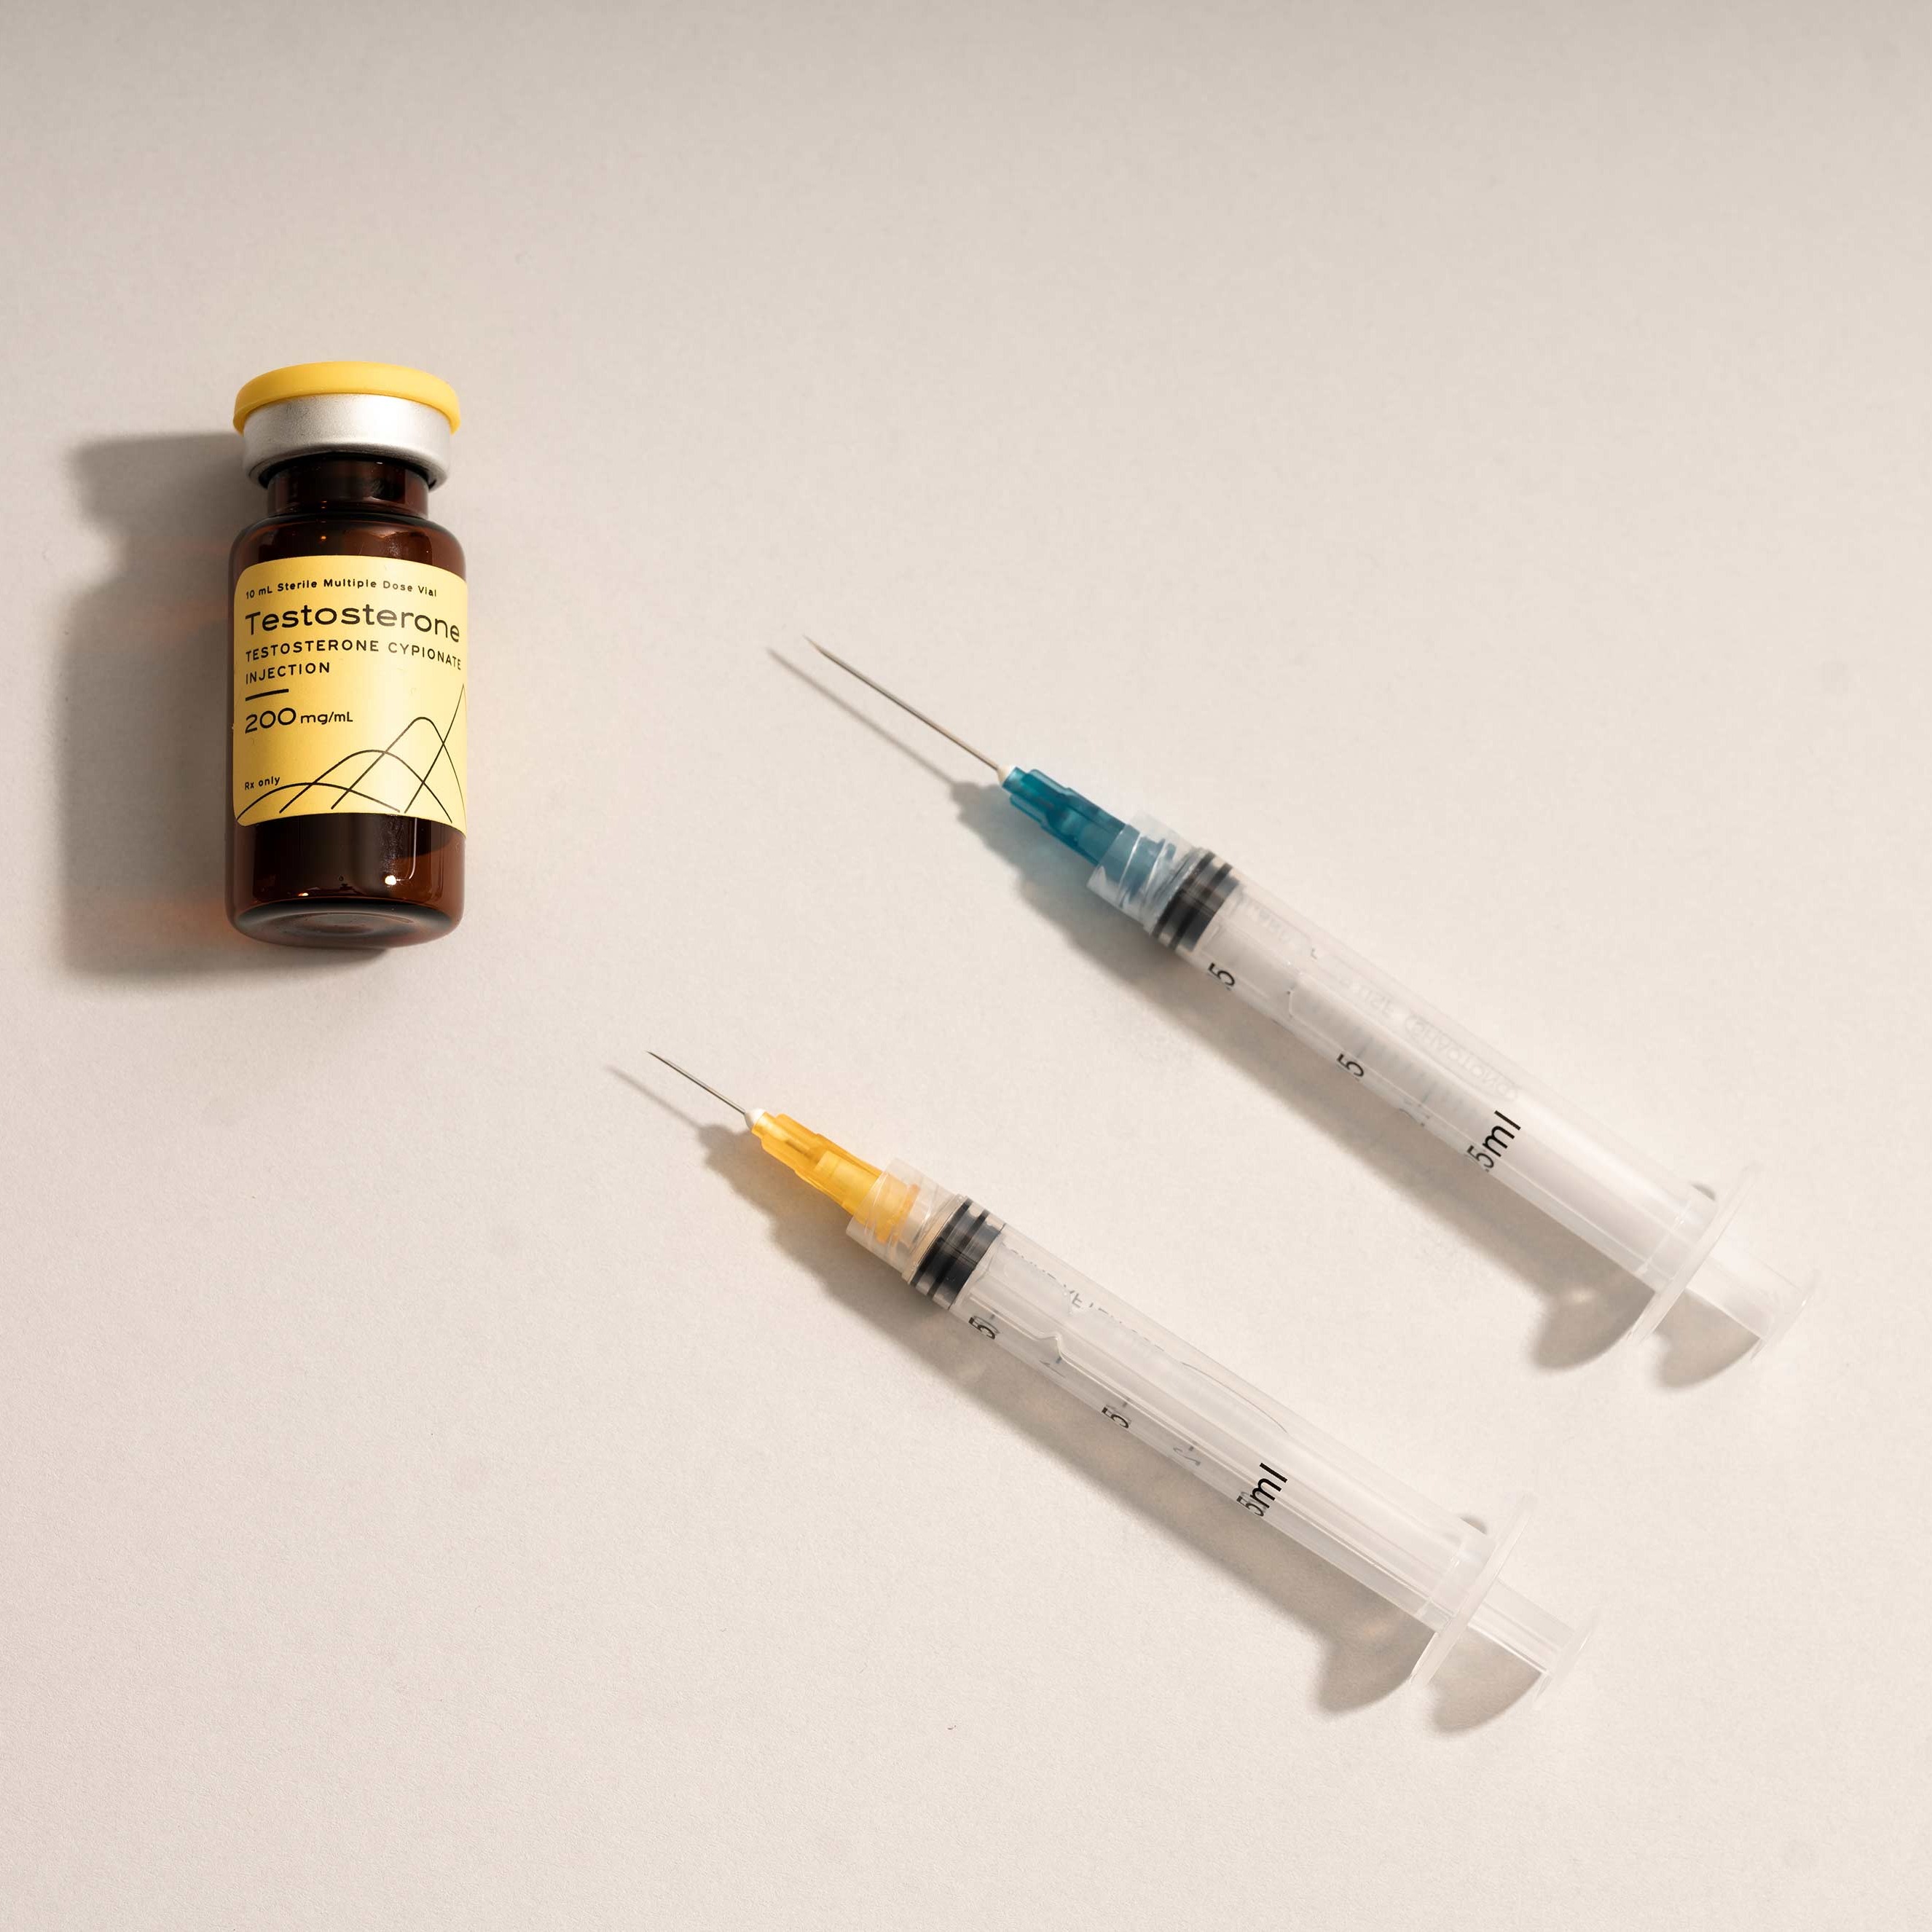 Can Injectable Testosterone Be Absorbed Through The Skin